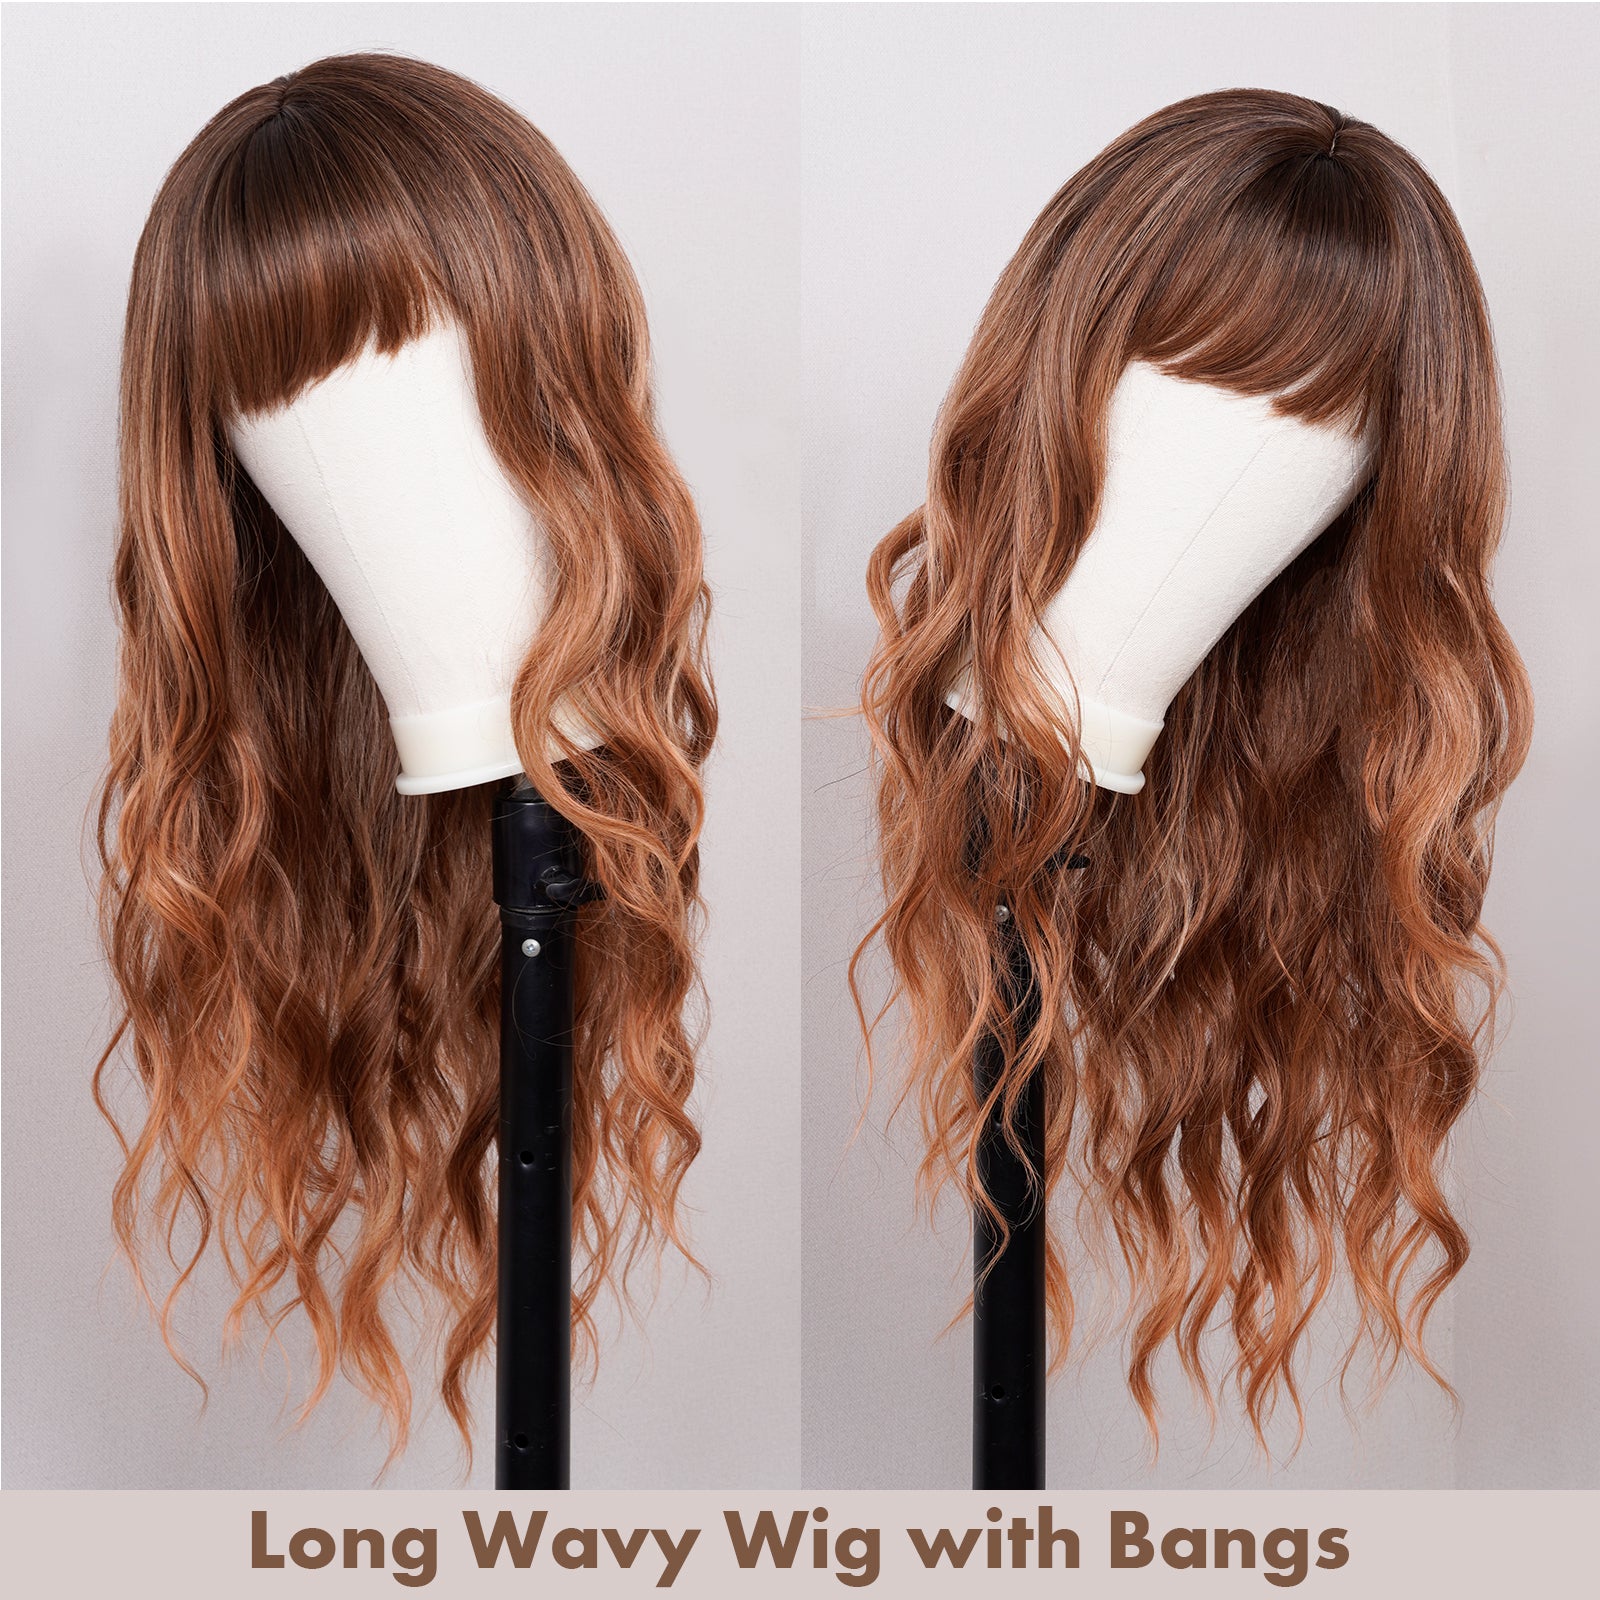 Toyotress New Long Wavy Wig Middle Part Highlights Wigs Synthetic Heat Resistant Curly Wig